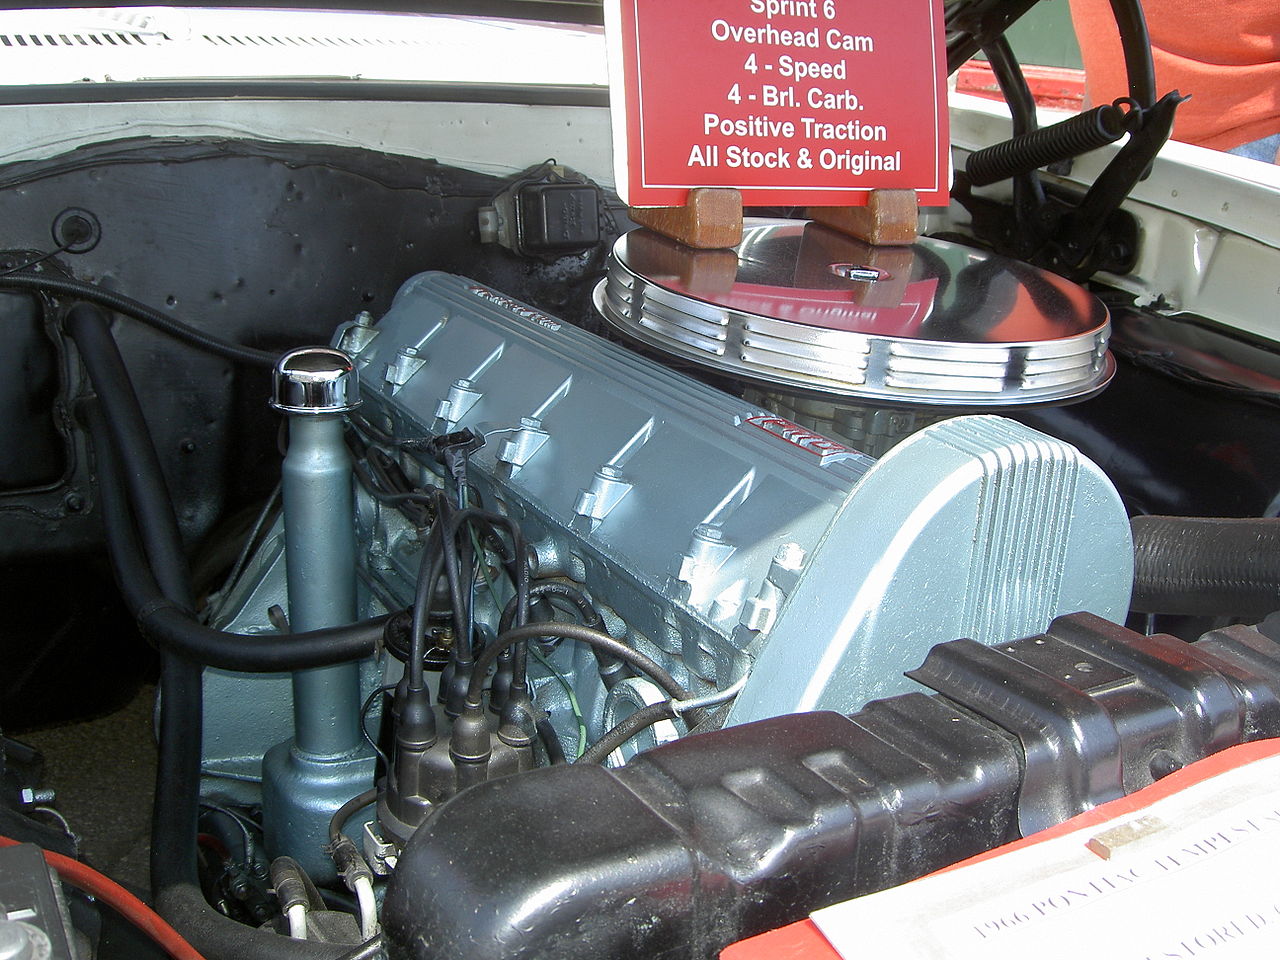 what engine did the 1967 pontiac firebird have & how much hp did it produce?